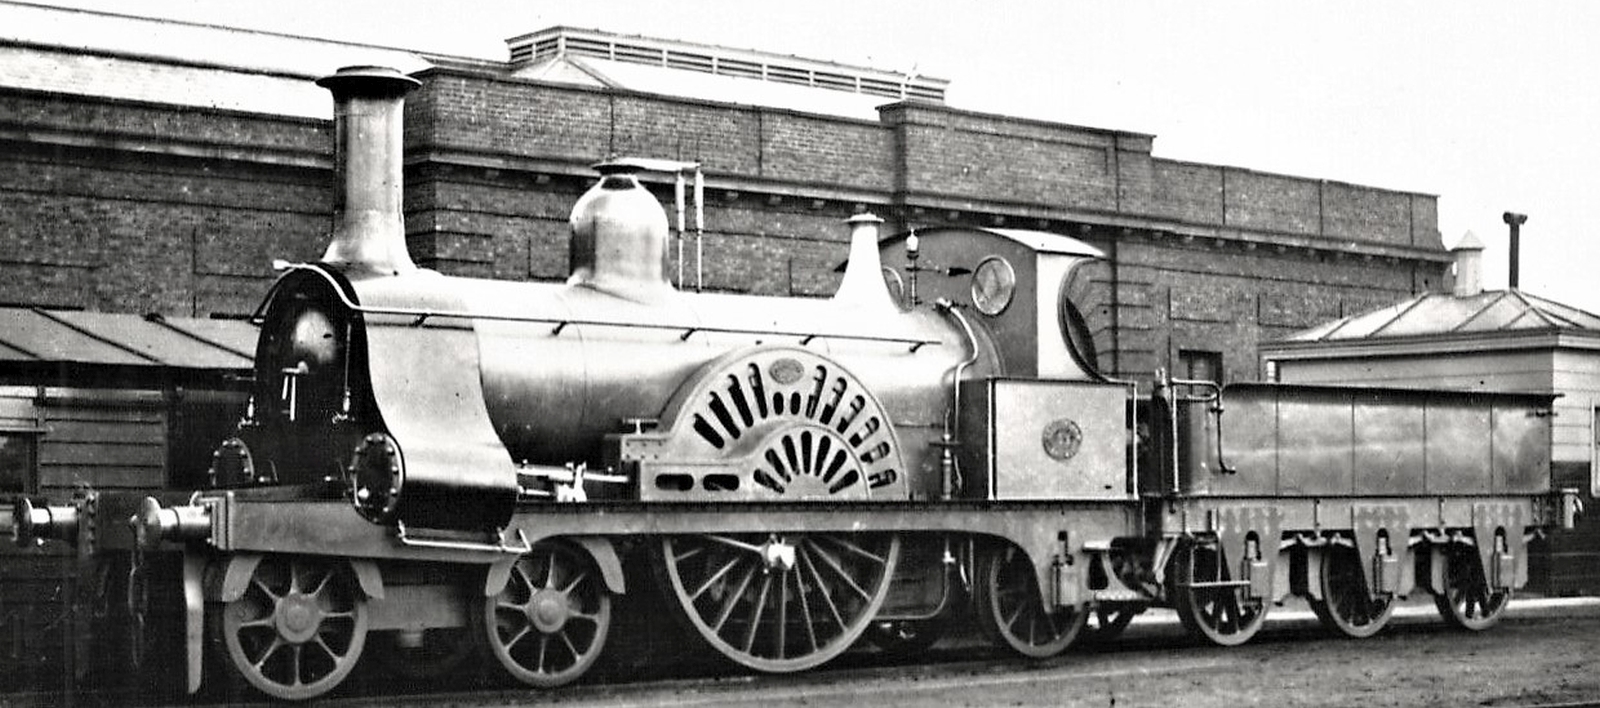 No. 51 after the rebuilt to 4-2-2 in Stratford